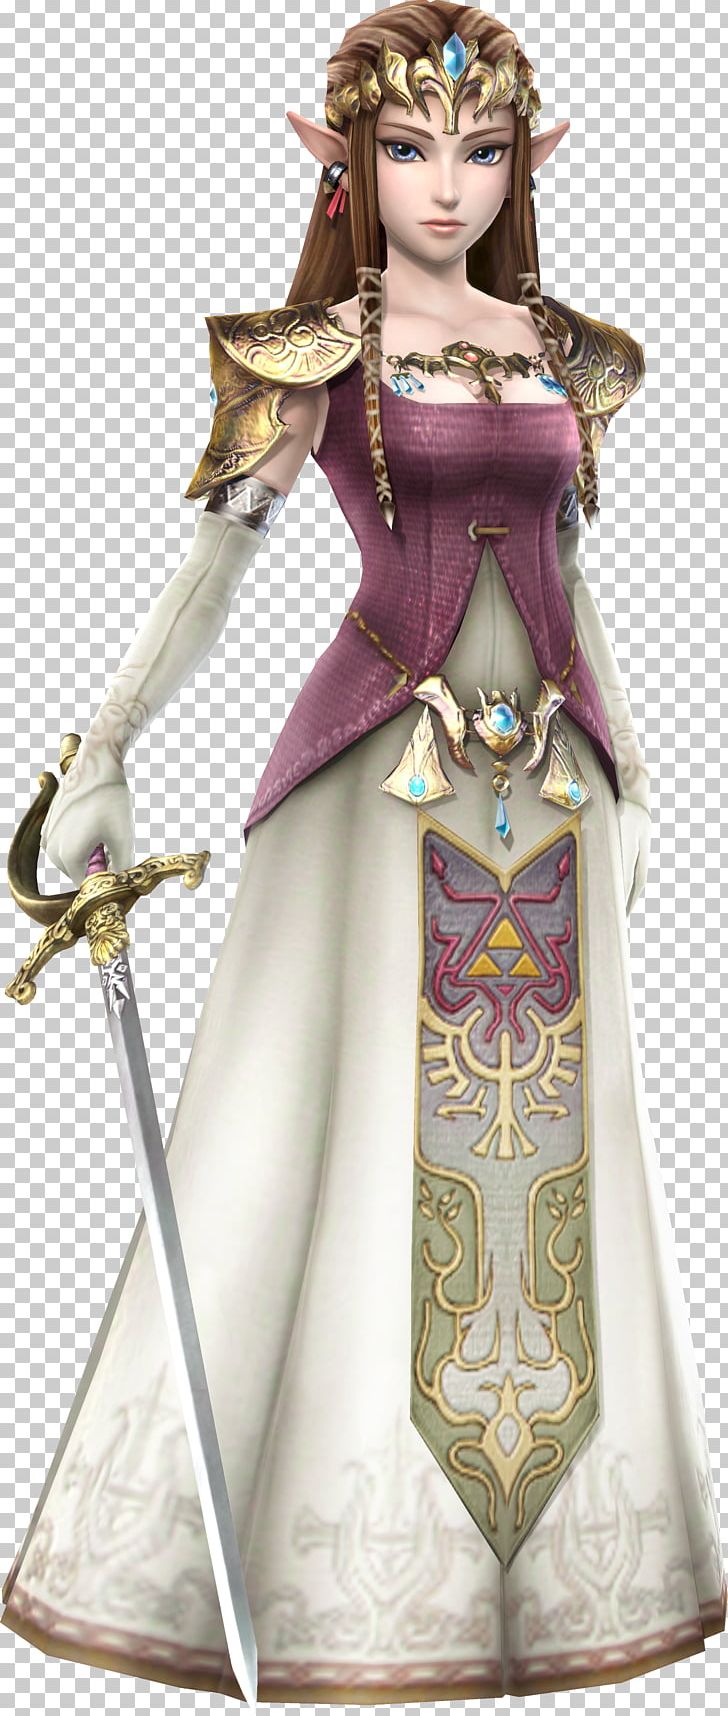 The Legend Of Zelda: Twilight Princess HD Hyrule Warriors Zelda II: The Adventure Of Link The Legend Of Zelda: Skyward Sword The Legend Of Zelda: Ocarina Of Time PNG, Clipart, Costume, Costume Design, Fictional Character, Figurine, Ganon Free PNG Download